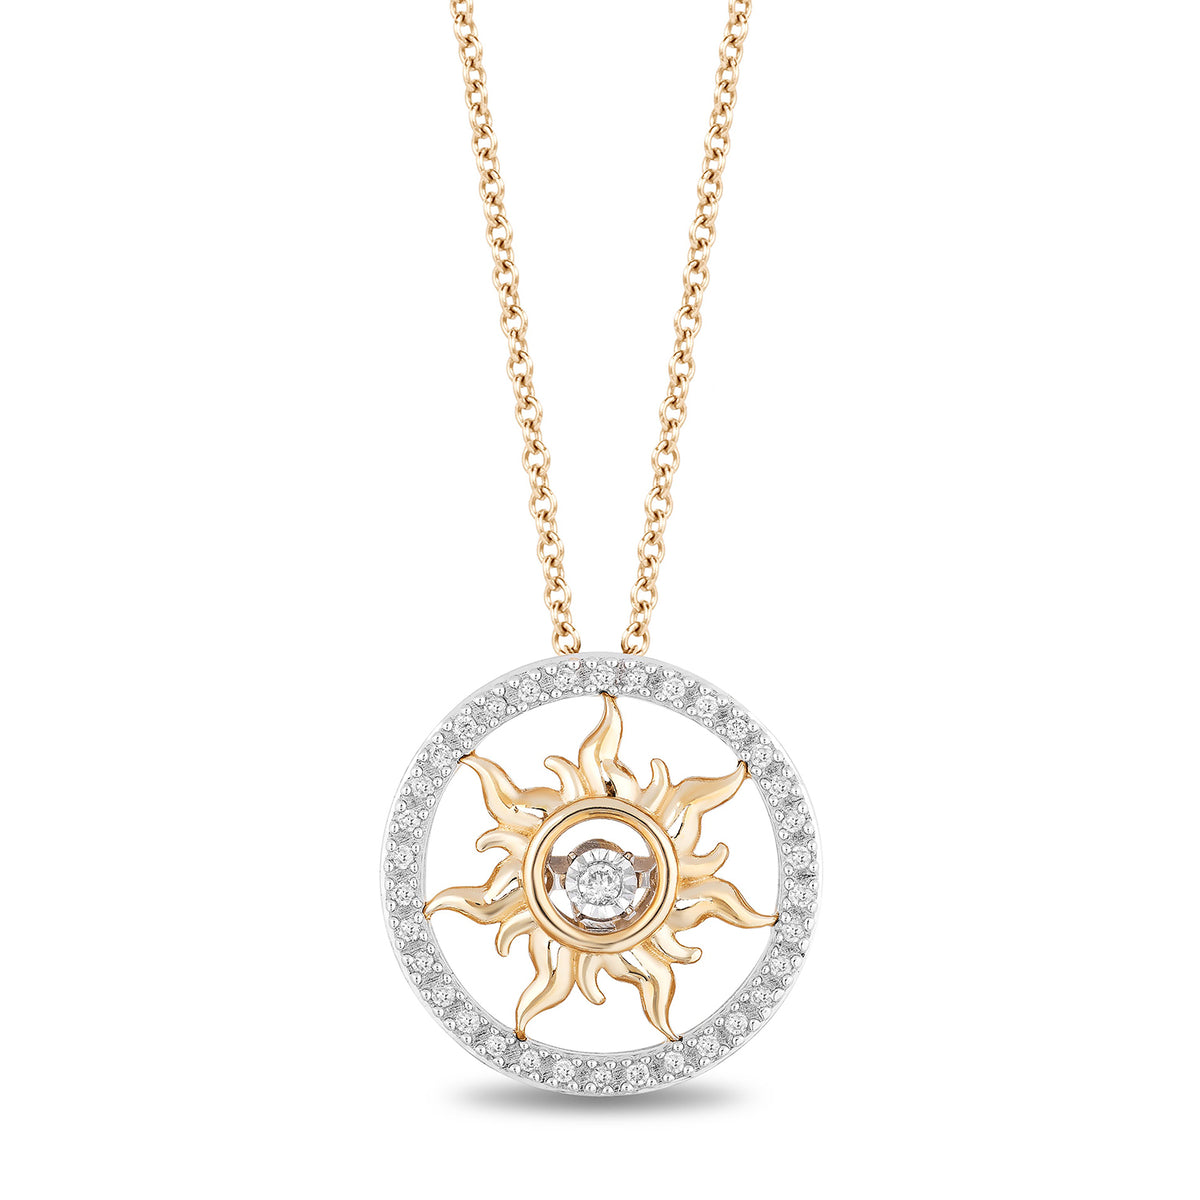 Real Gold-Plated Star Pendant Necklace - Accessorize India